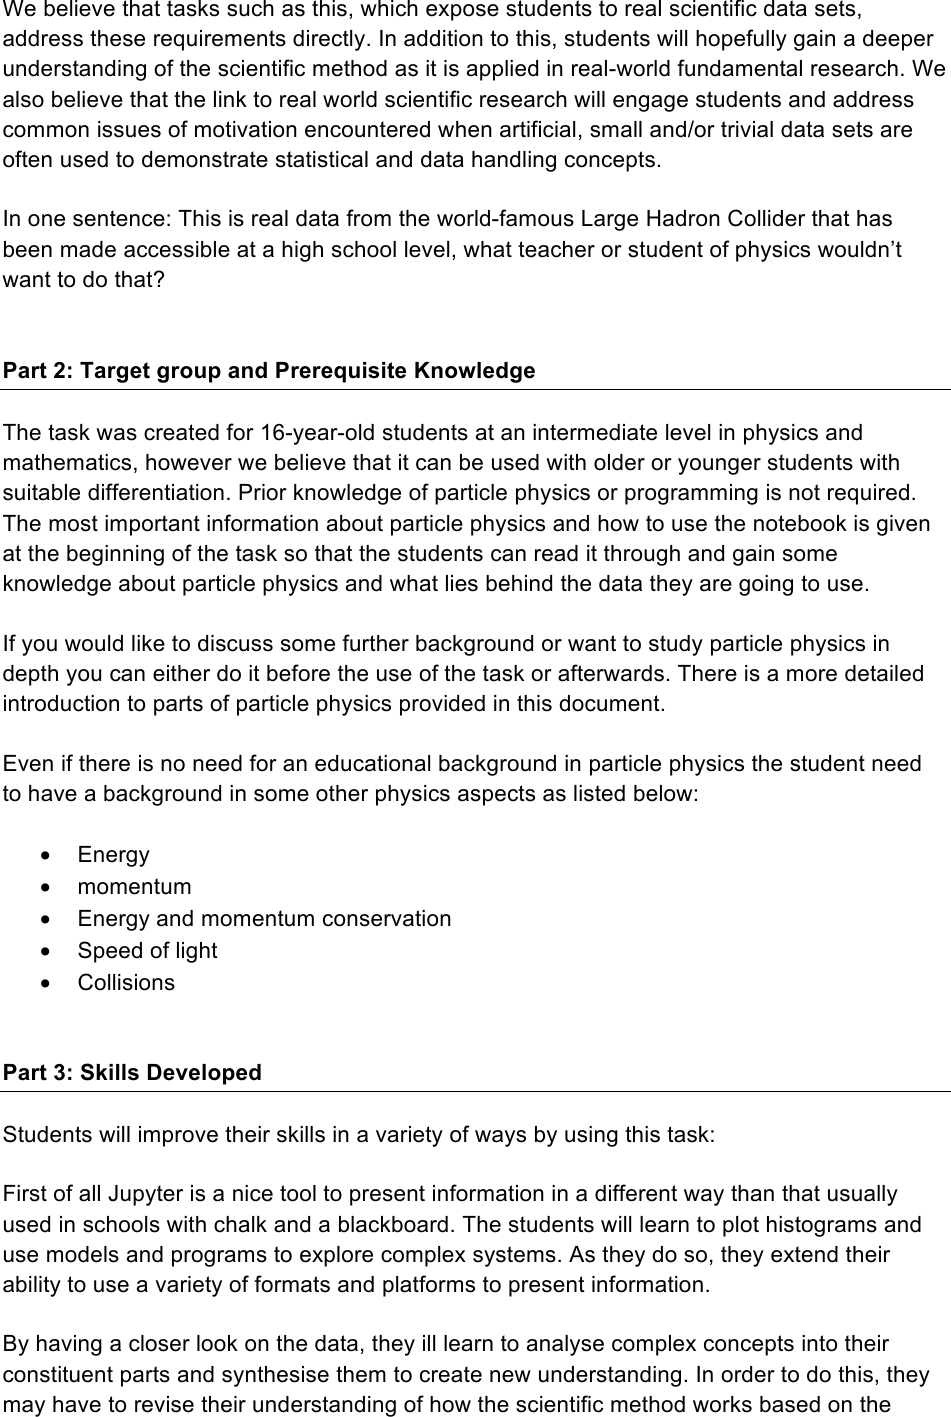 Page 2 of 11 - JPsi For High School Teachers Guide